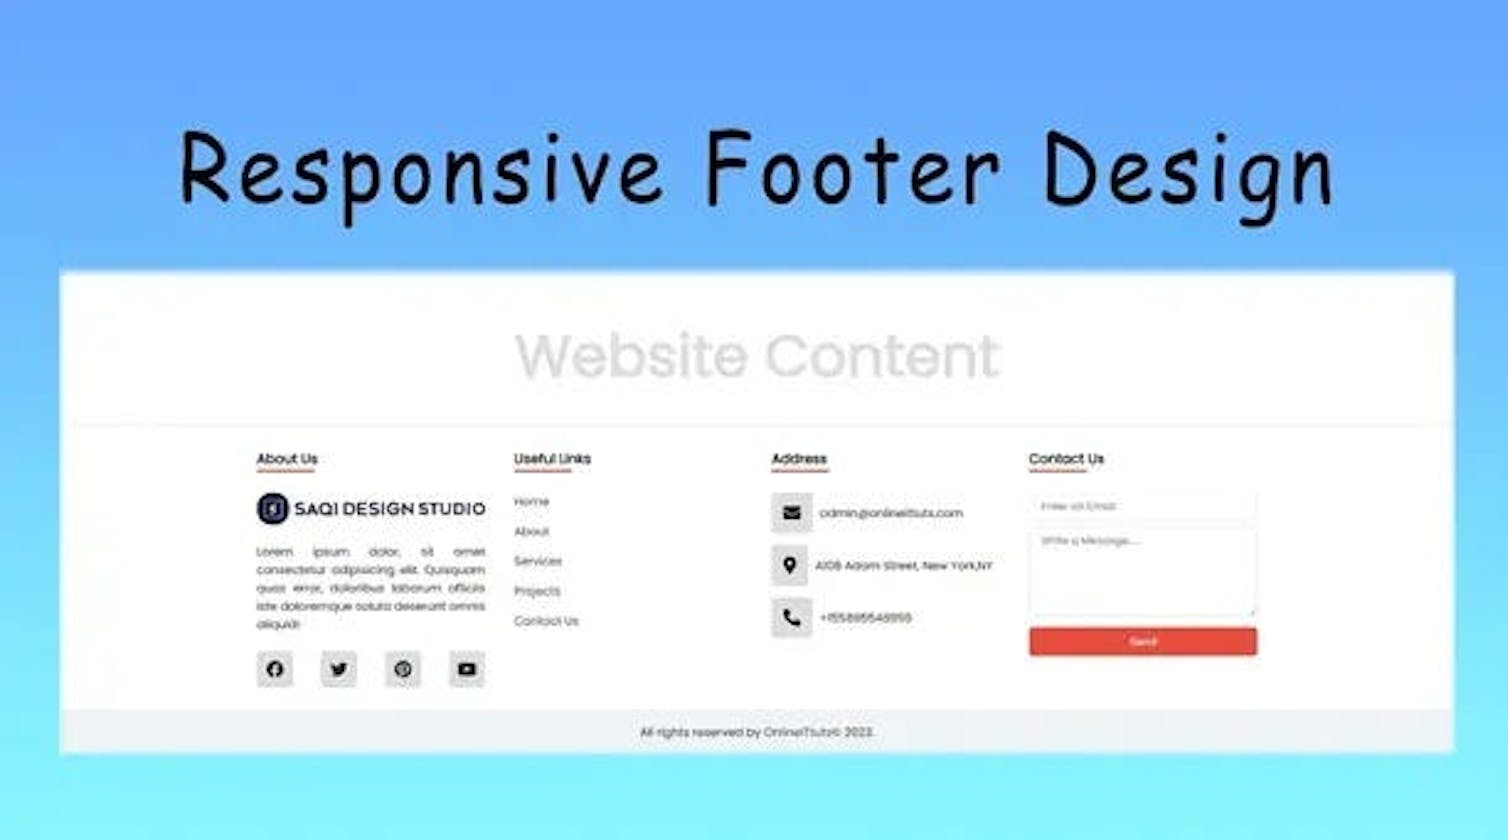 Responsive Footer Design Using HTML and CSS